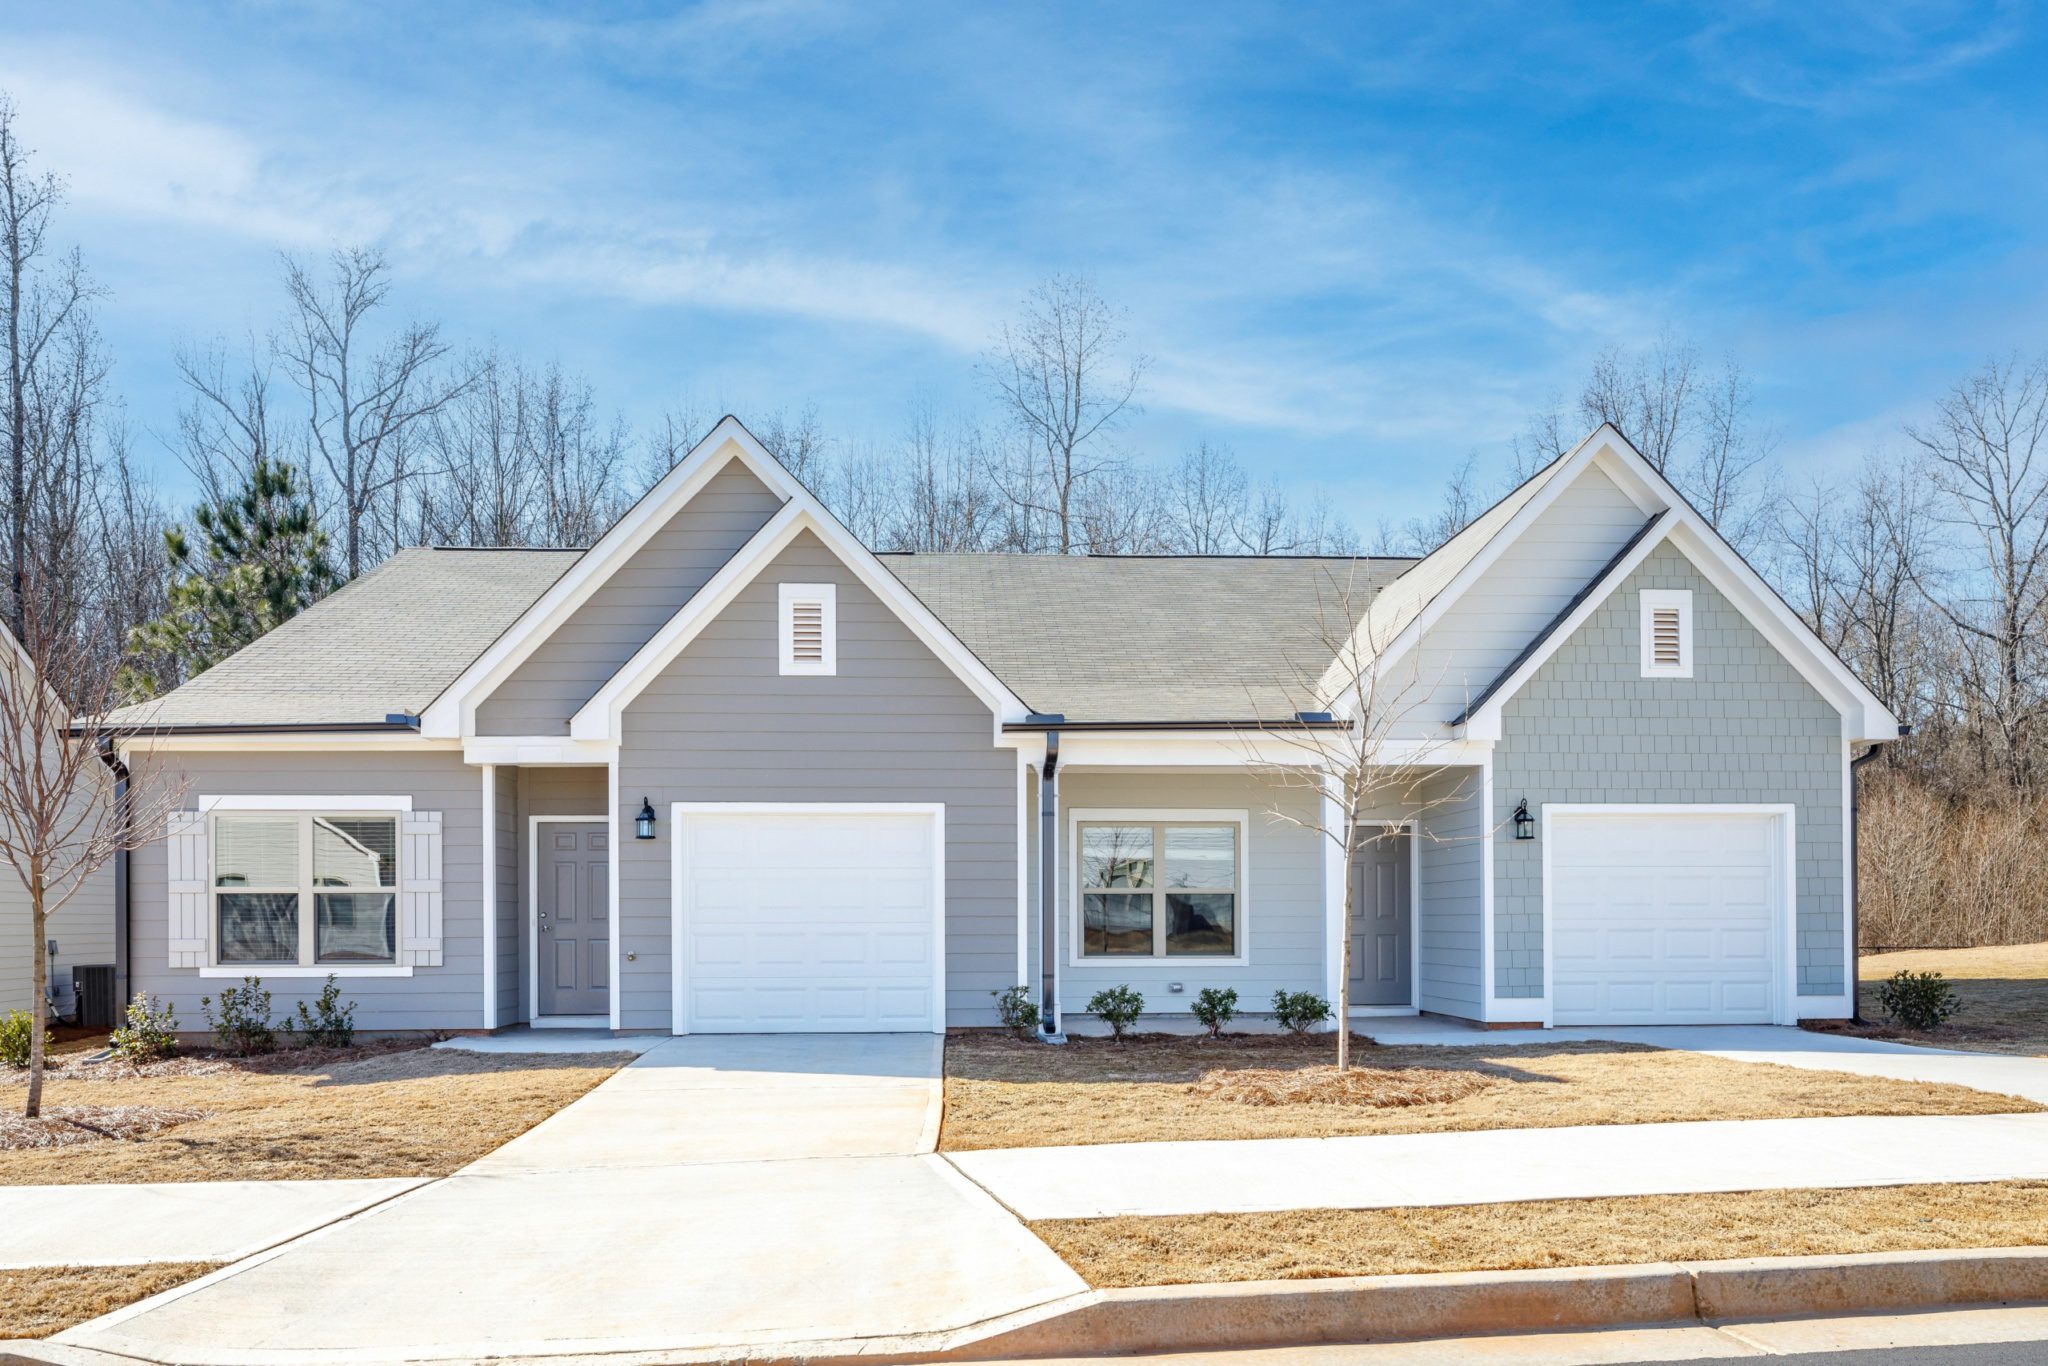 Exterior shot of grey in color townhomes with garages